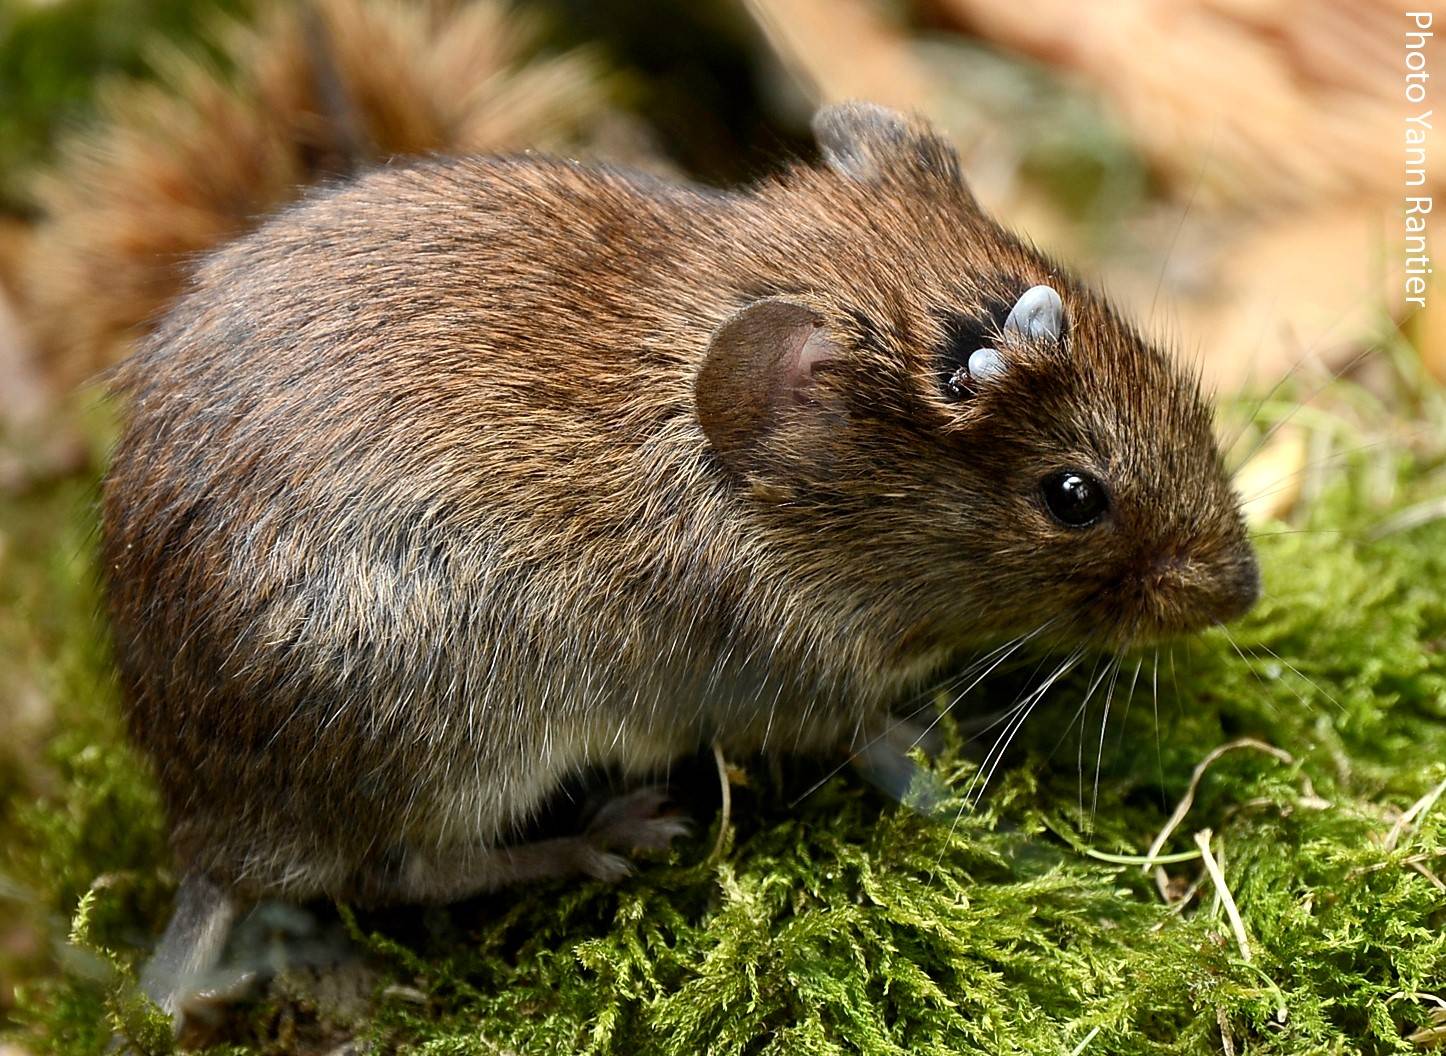 Ticks gorged on the head of a bank vole, one of the most common small rodent species in our agro-ecosystems.  Photo Yann Rantier (OSCAR project).